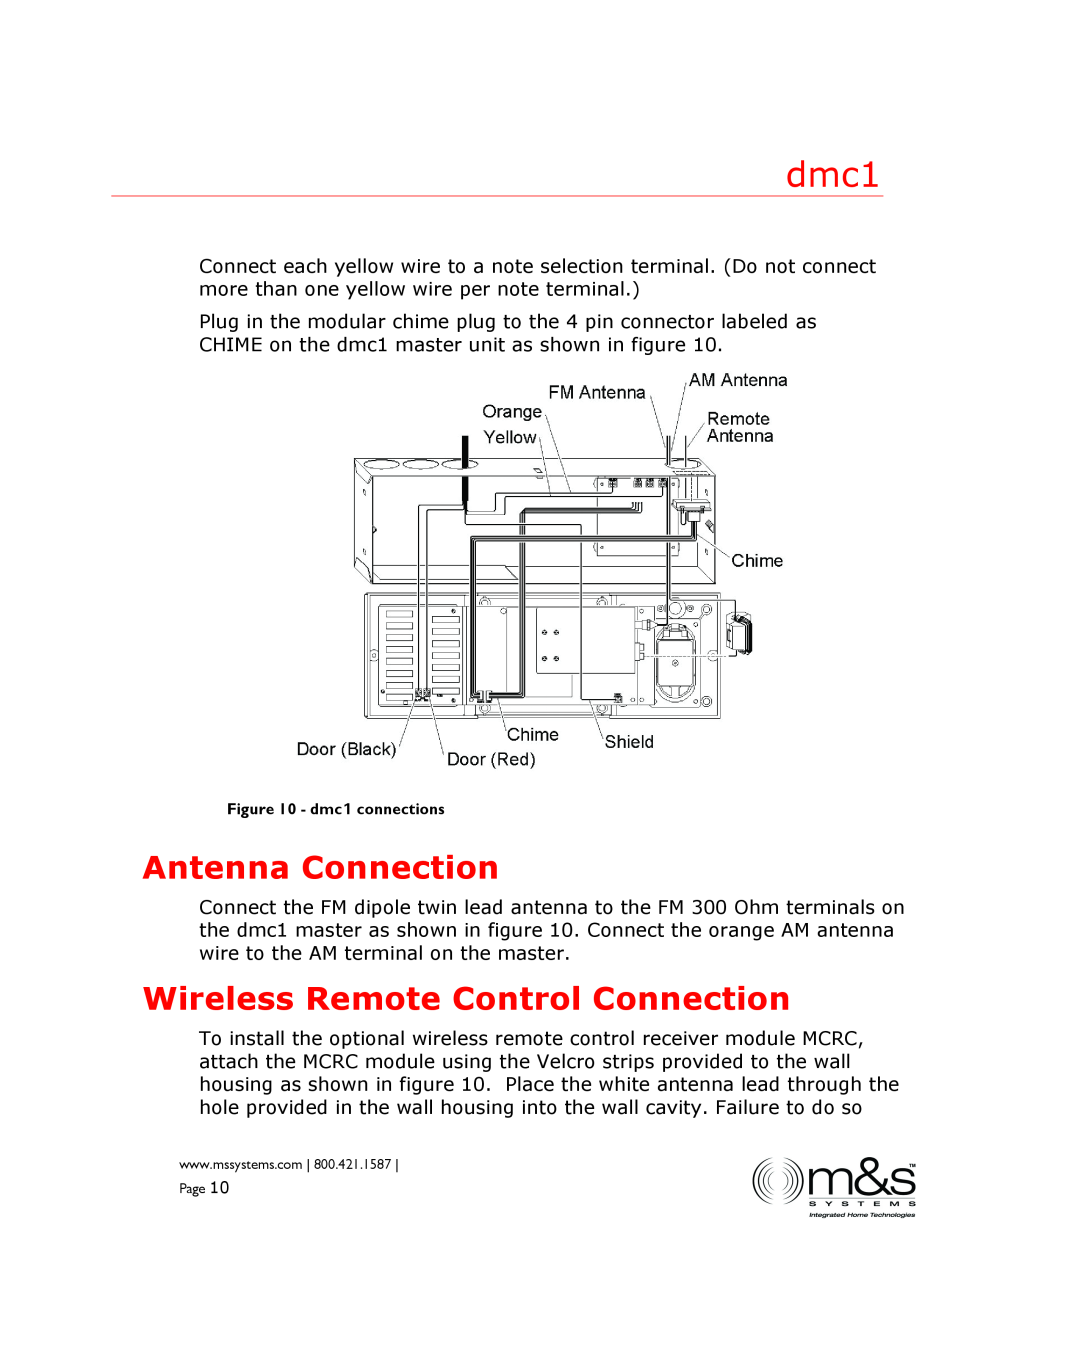 M&S Systems manual Antenna Connection, Wireless Remote Control Connection, dmc1 connections 